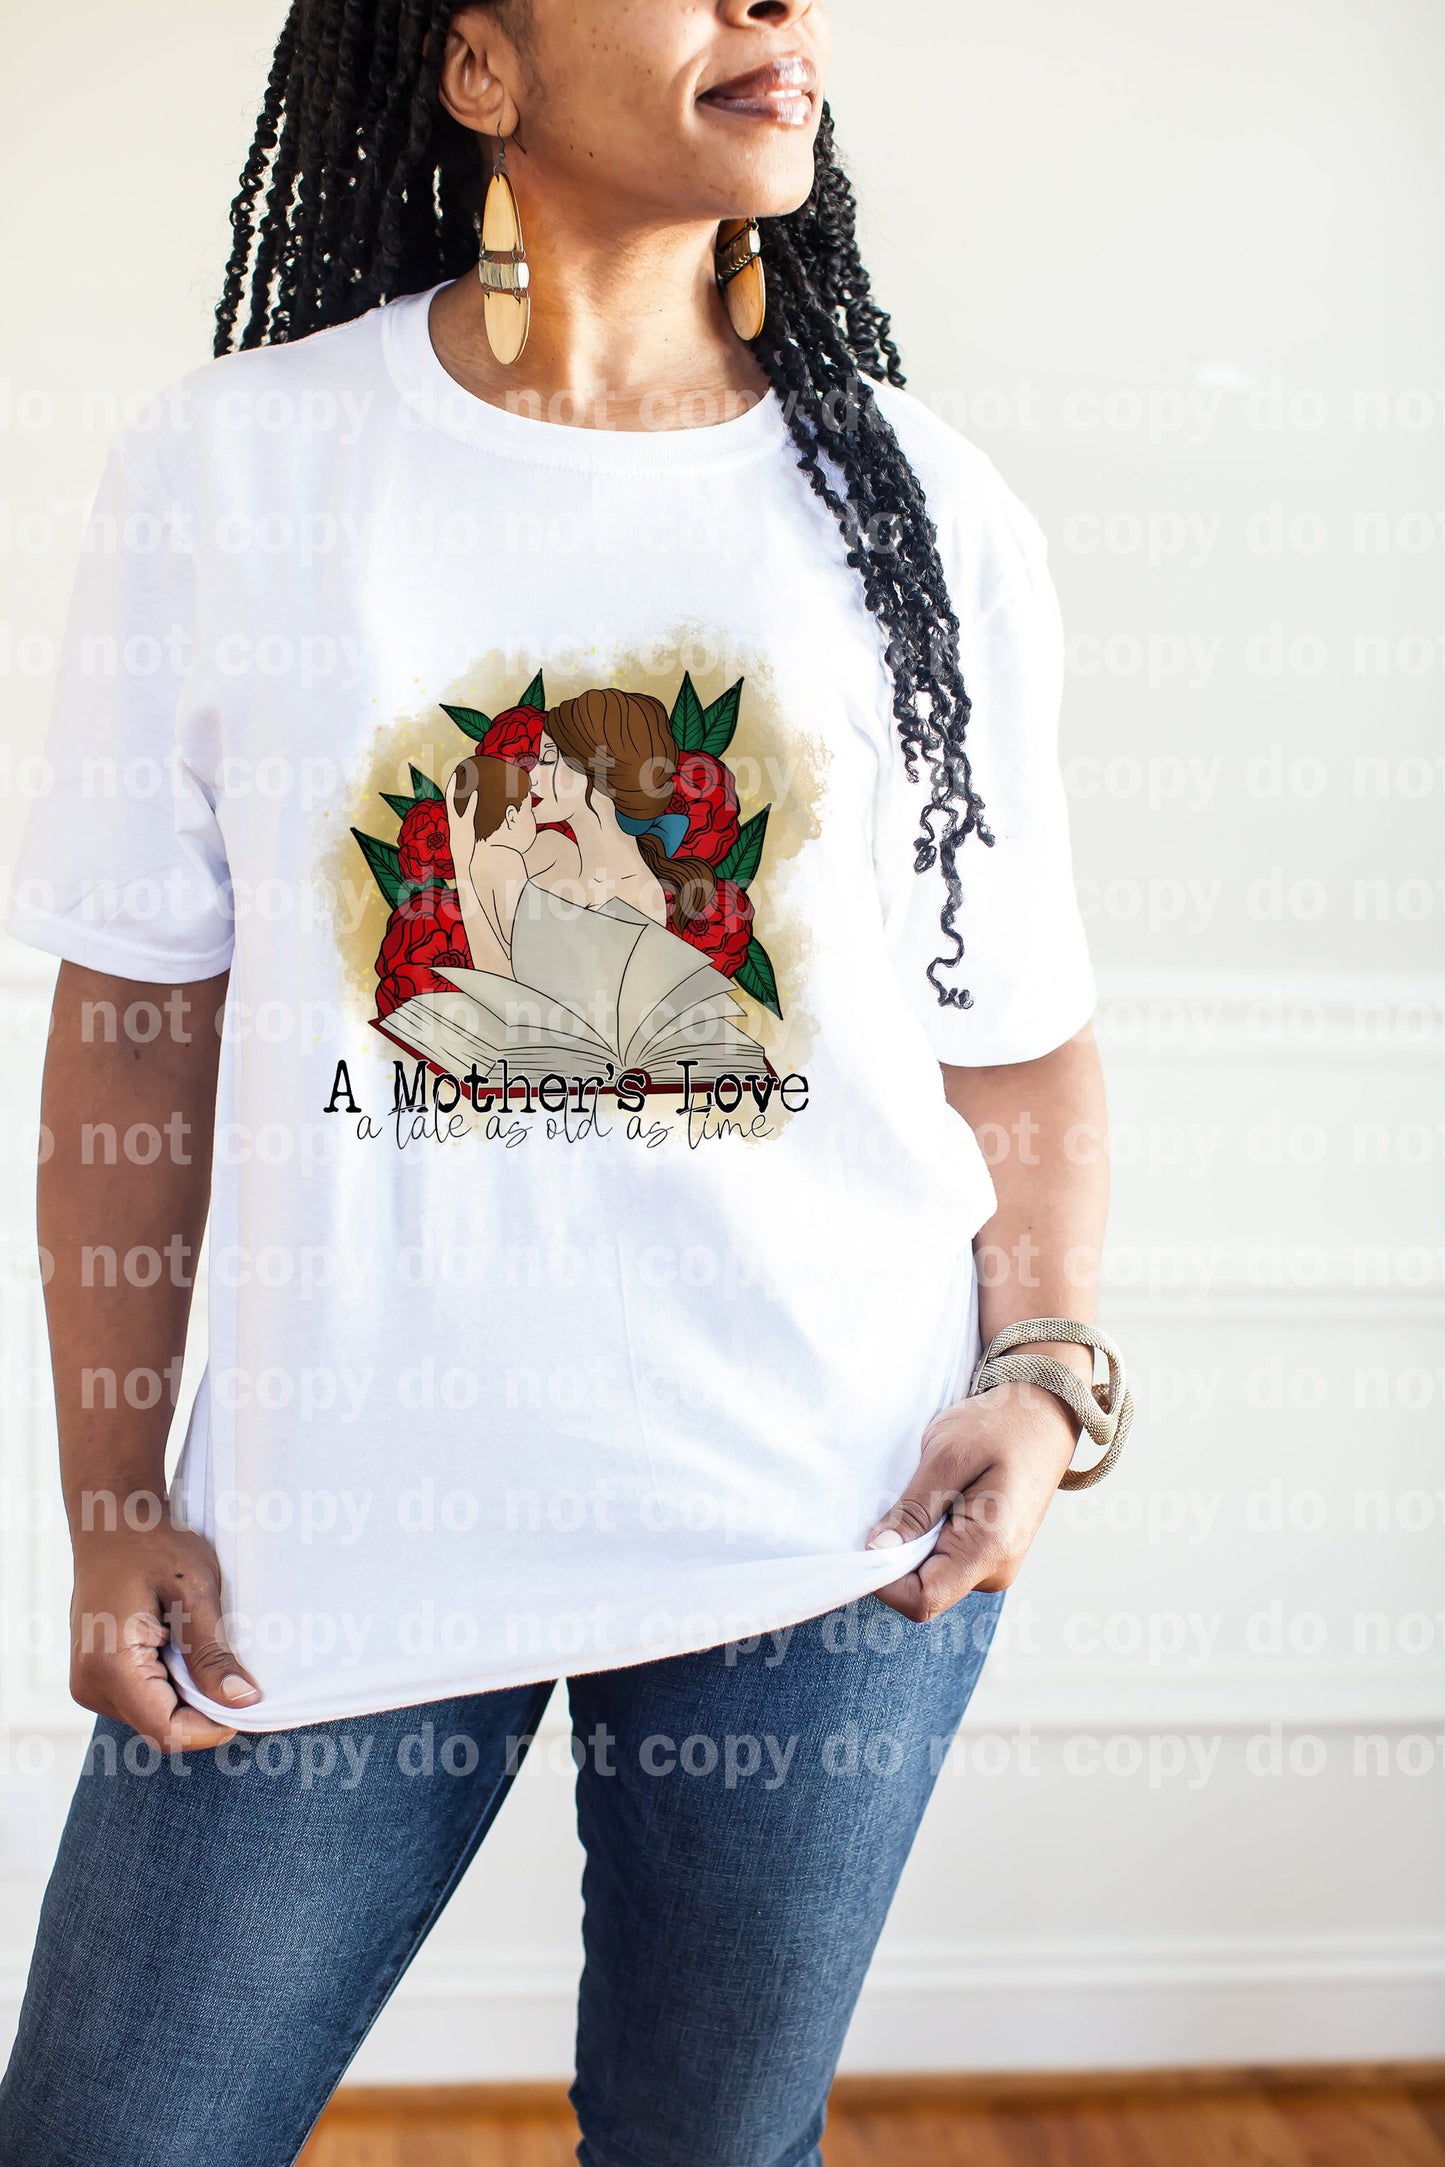 A Mother's Love A Tale As Old As Time Dream Print or Sublimation Print